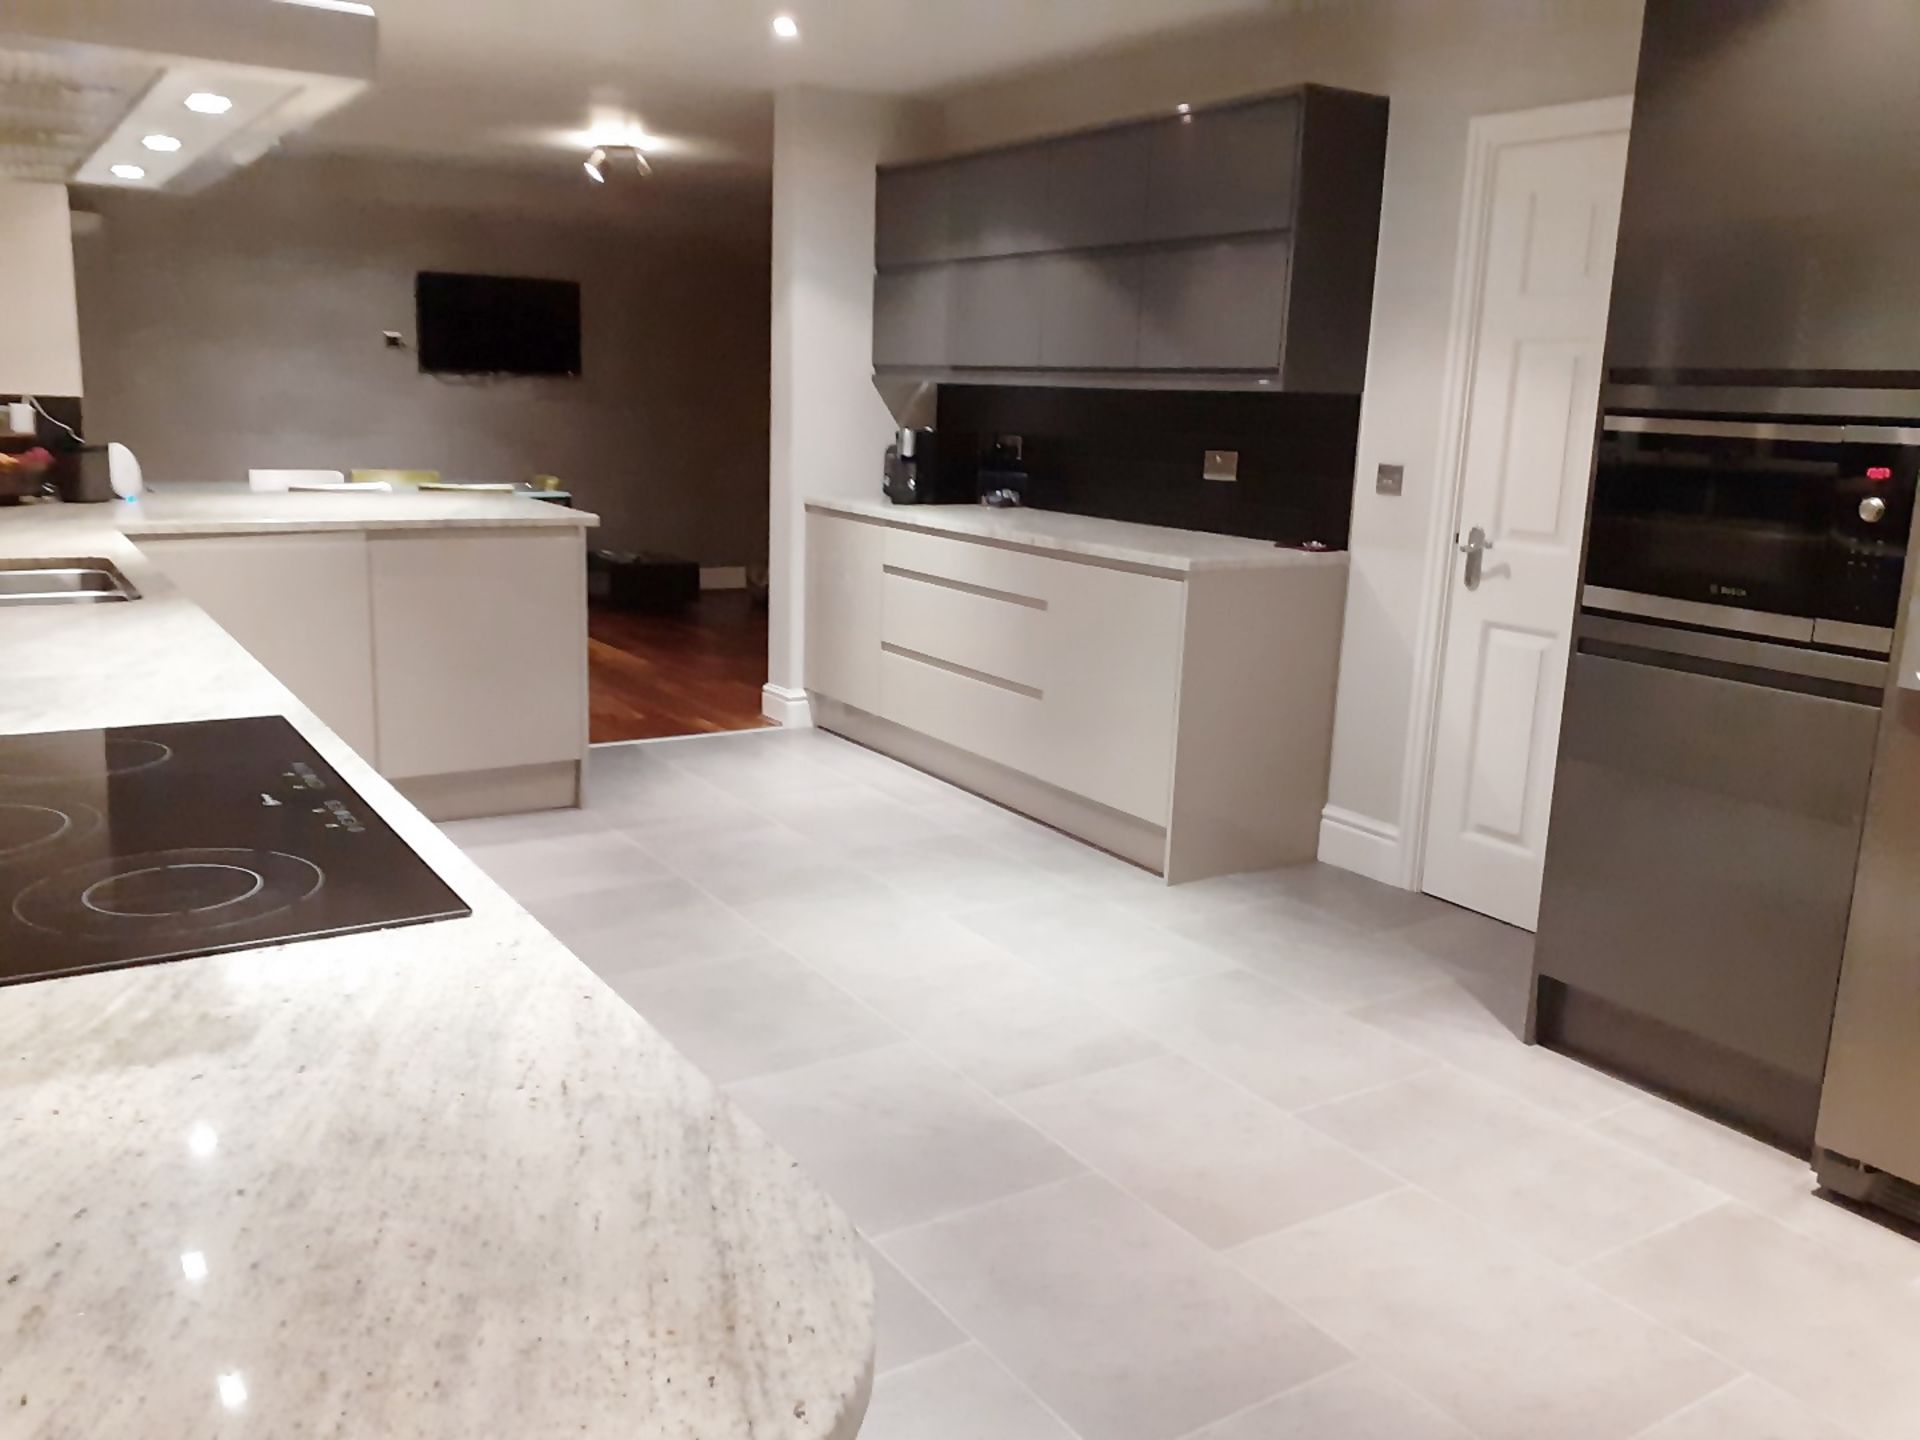 1 x Fitted Kitchen With A Sleek Handleless Design, Integrated Bosch Appliances + Granite Worktops - Image 69 of 69